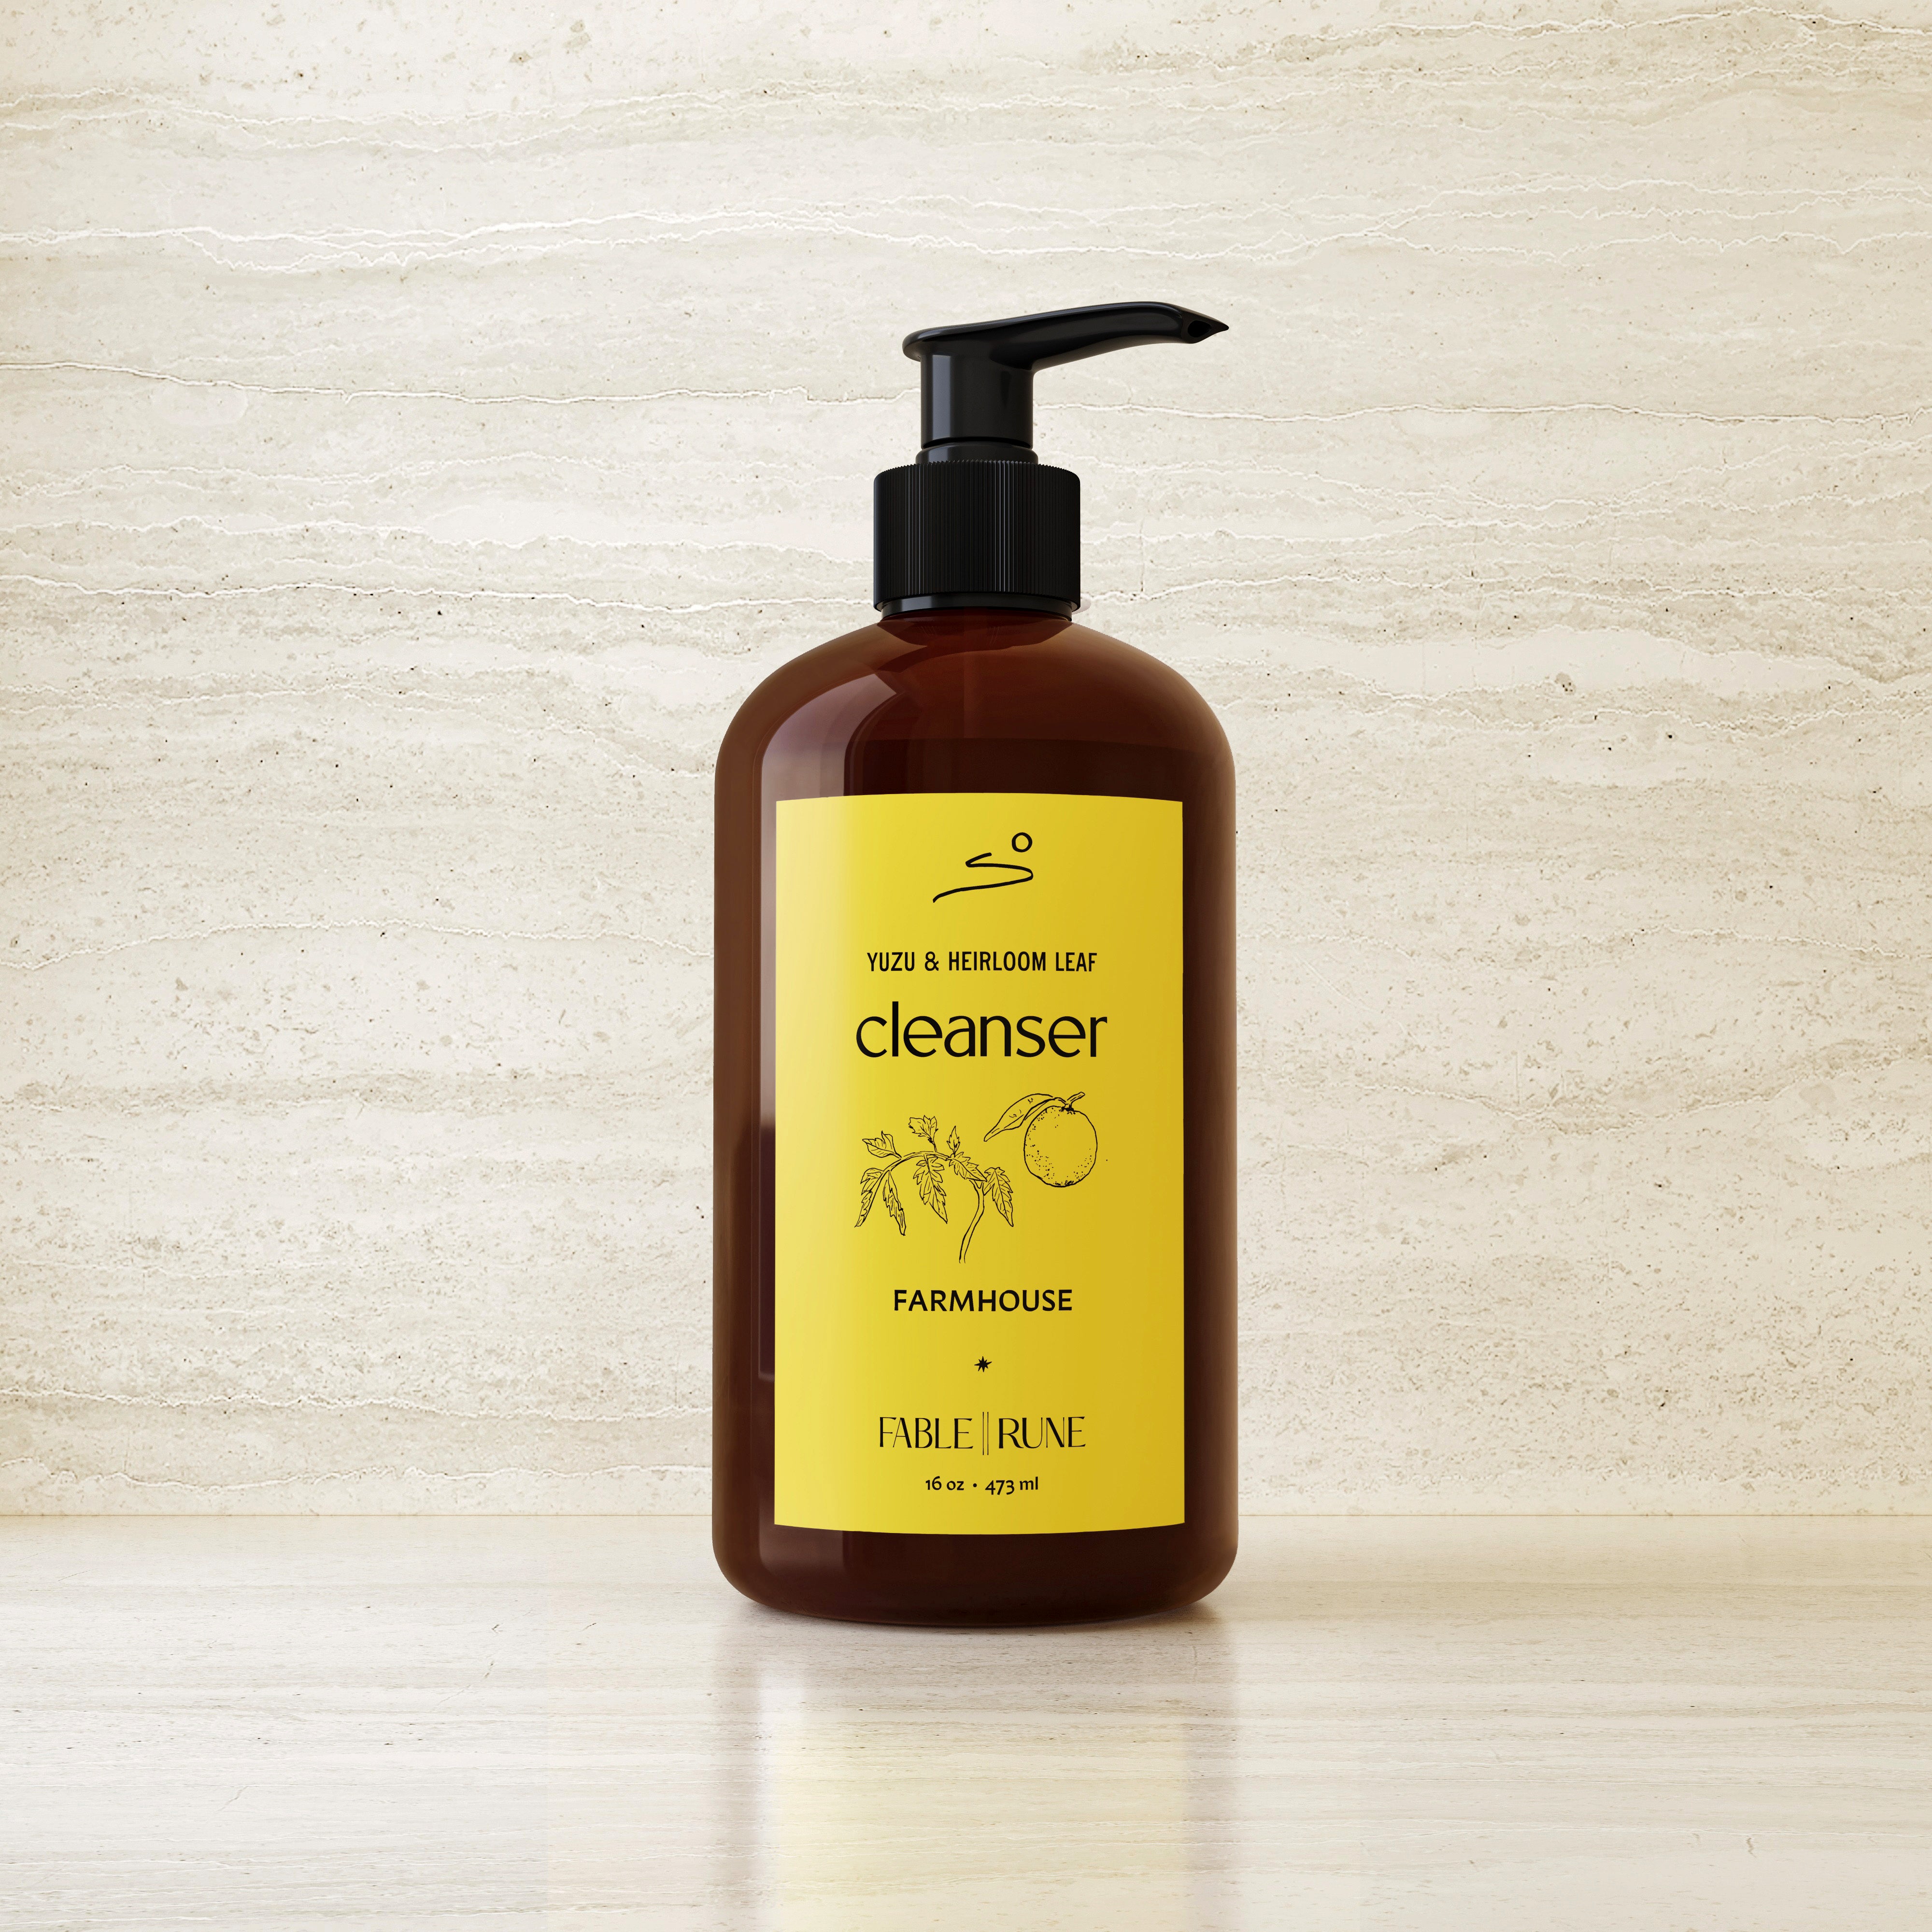 Yuzu & Heirloom Leaf Cleanser Handcrafted Fable Rune for Farmhouse Paso Robles by Nomada Deco